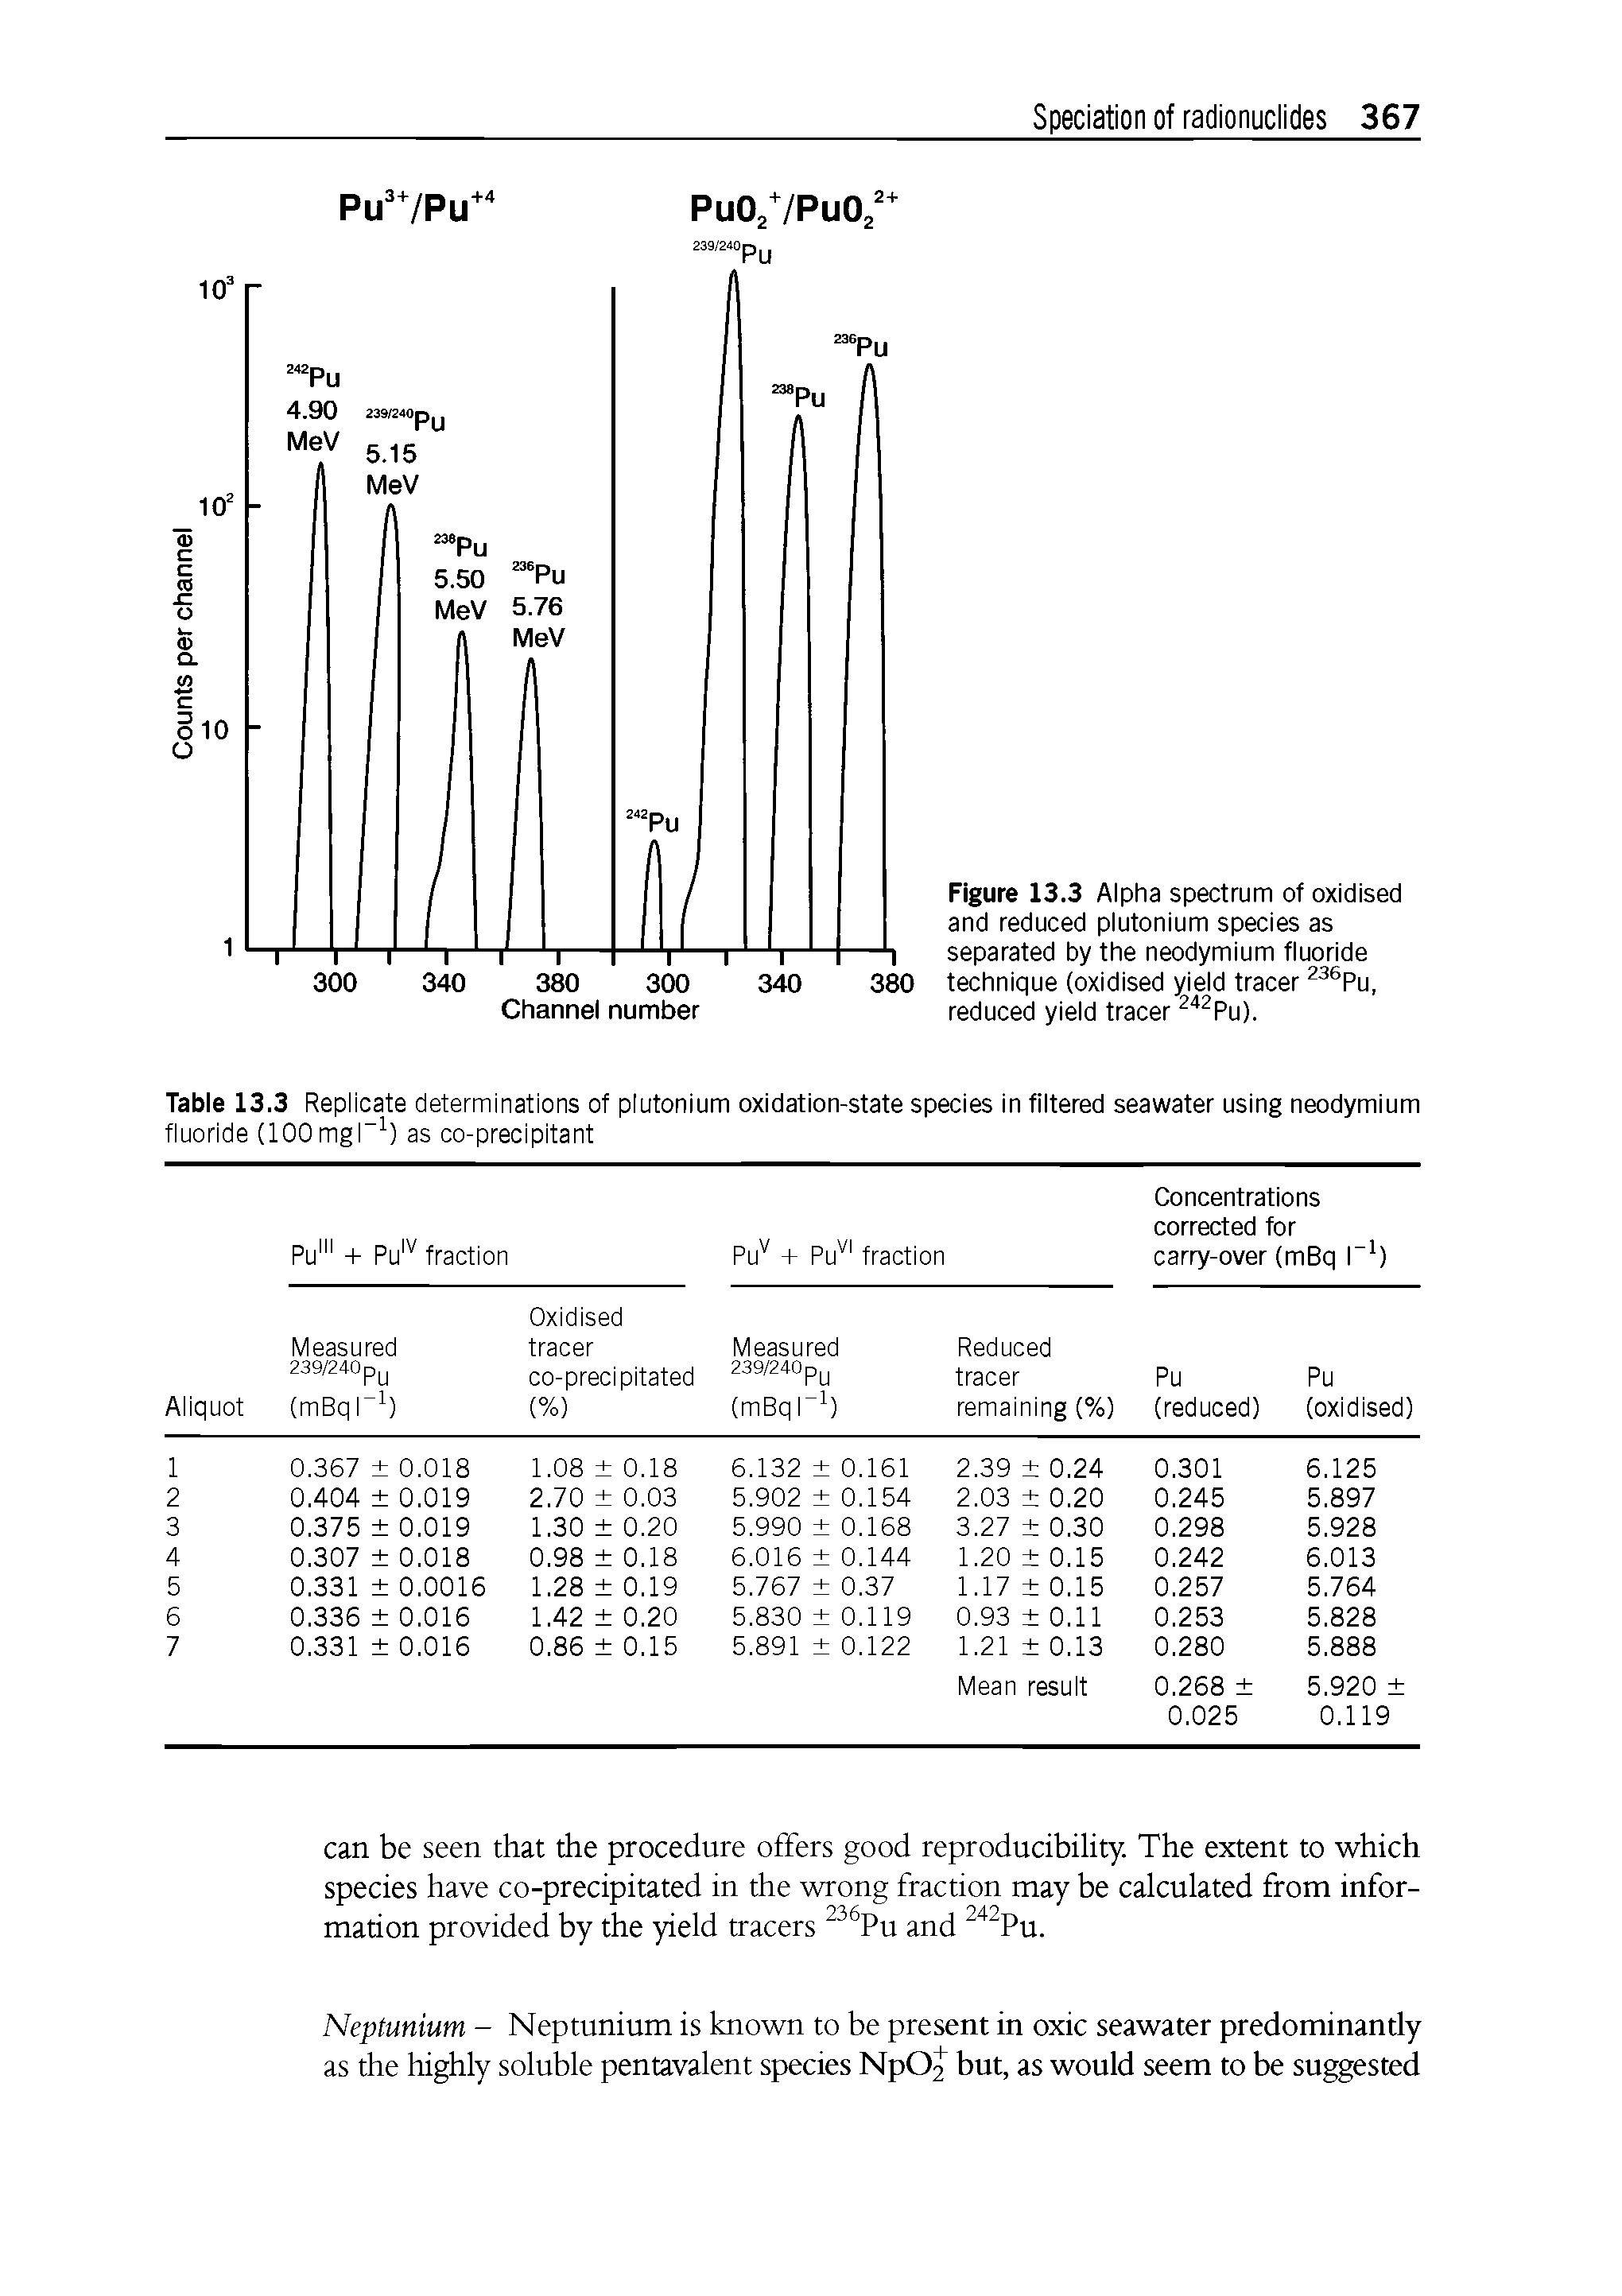 Figure 13.3 Alpha spectrum of oxidised and reduced plutonium species as separated by the neodymium fluoride technique (oxidised yield tracer 236Pu, reduced yield tracer 242Pu).